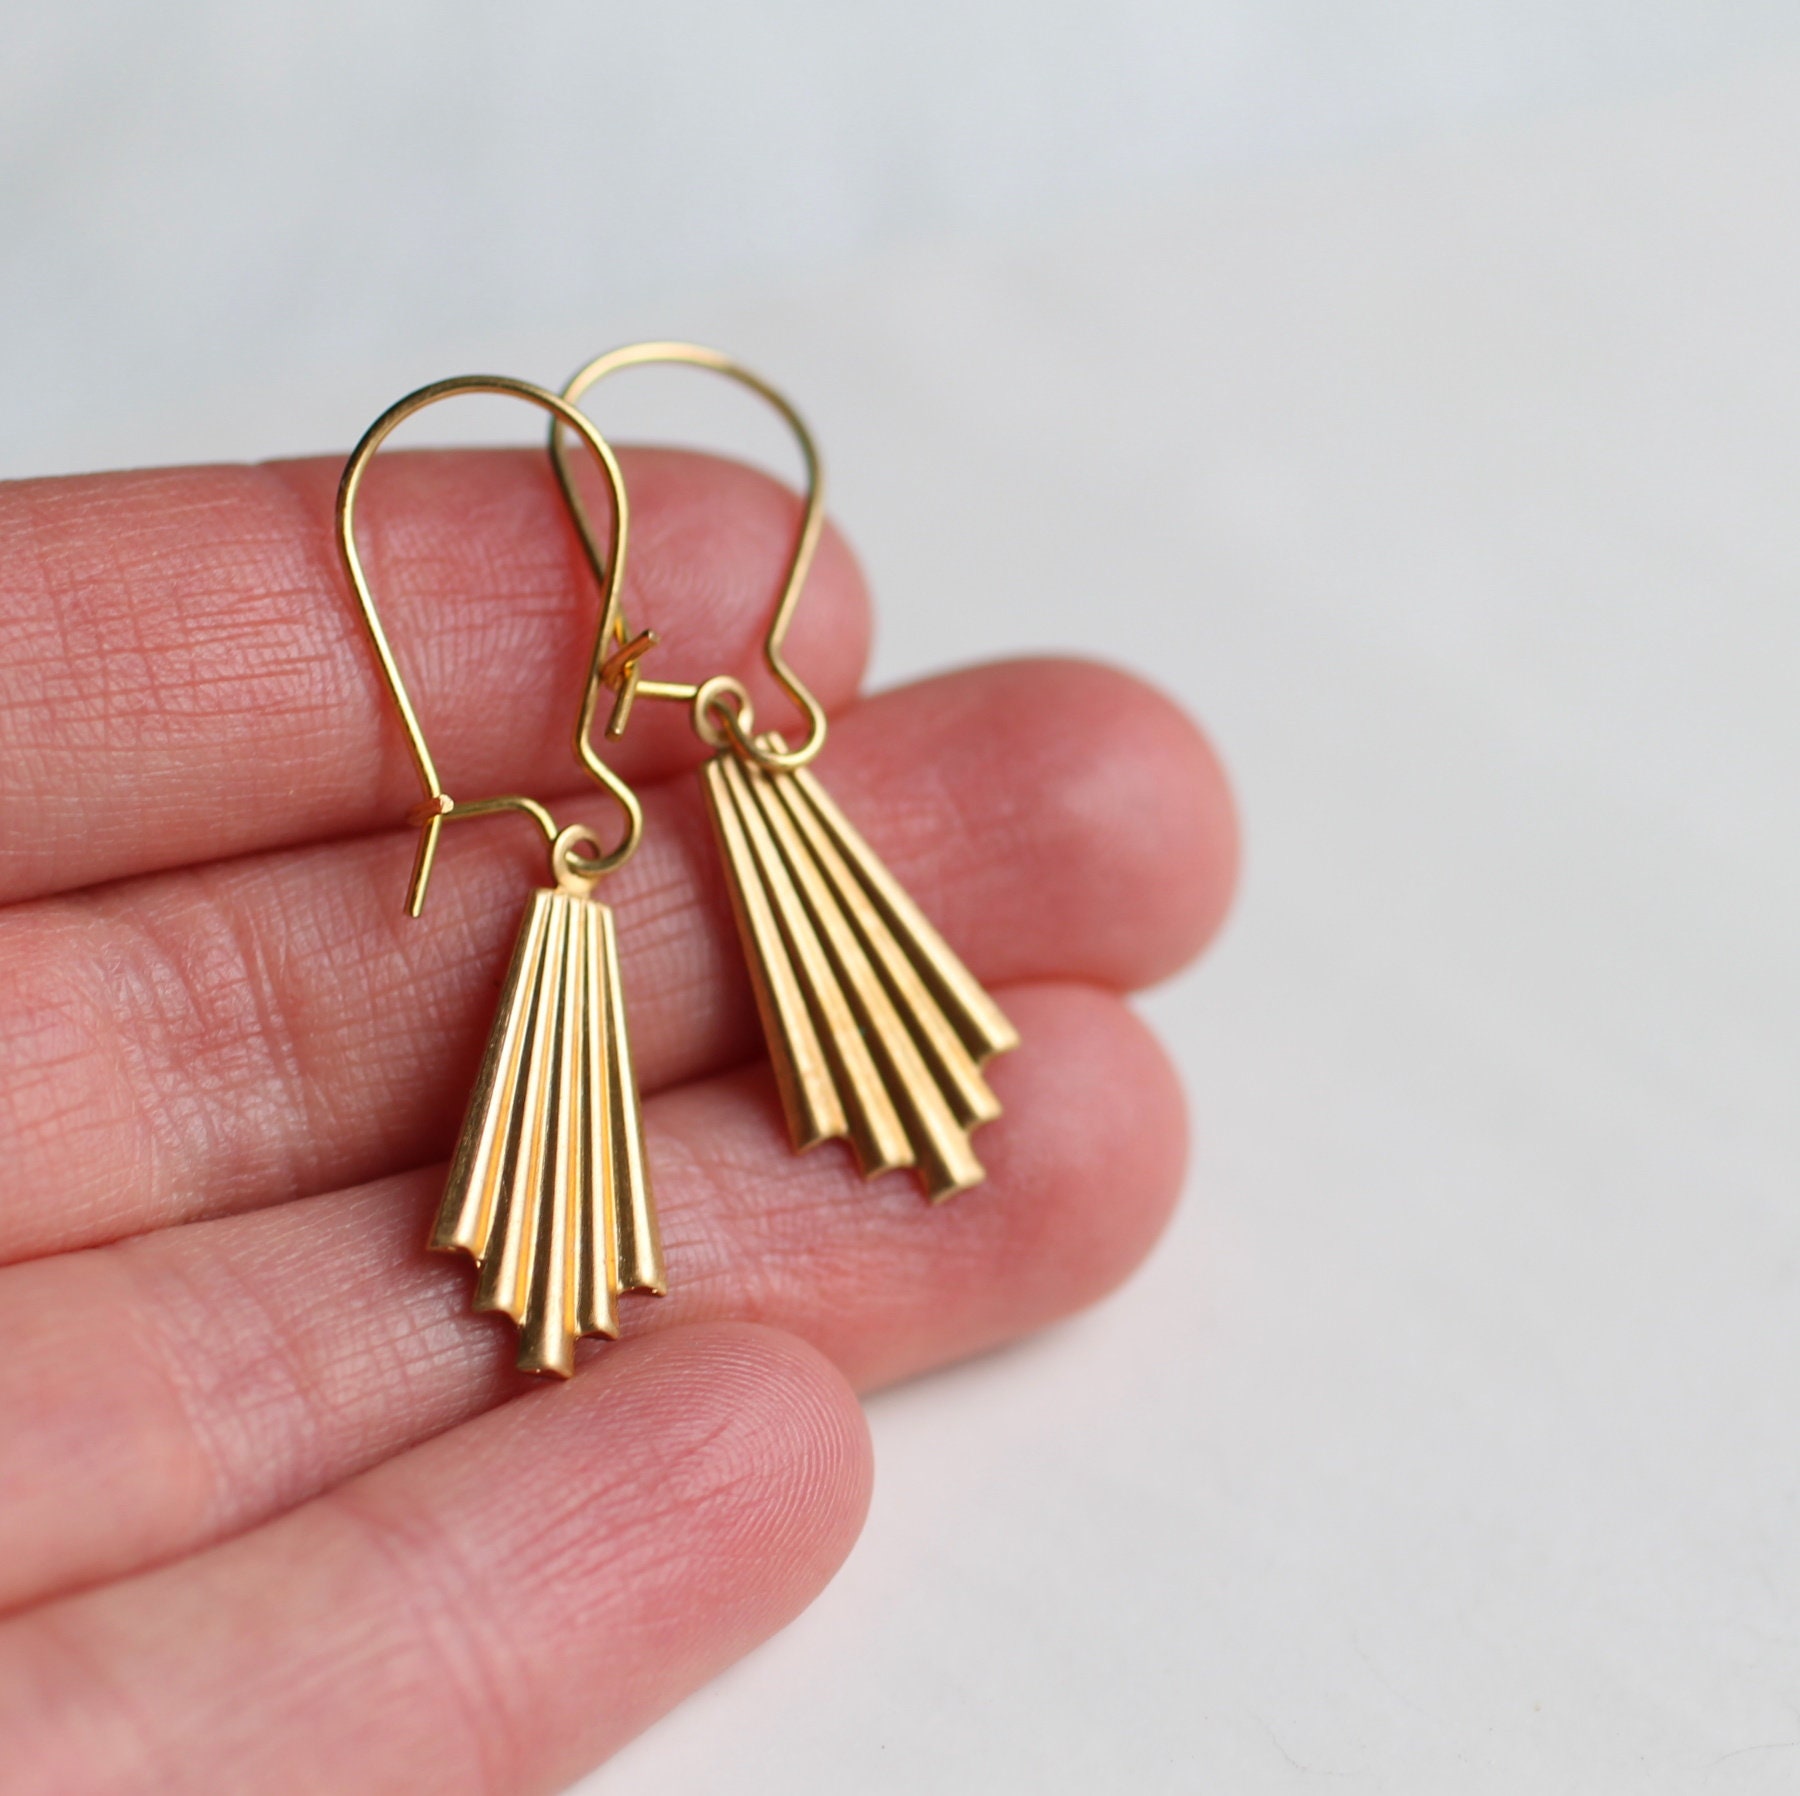 Art Deco Earrings Pearl Drop Gold Long Stick Round Stud Vintage Style Lady Gift 